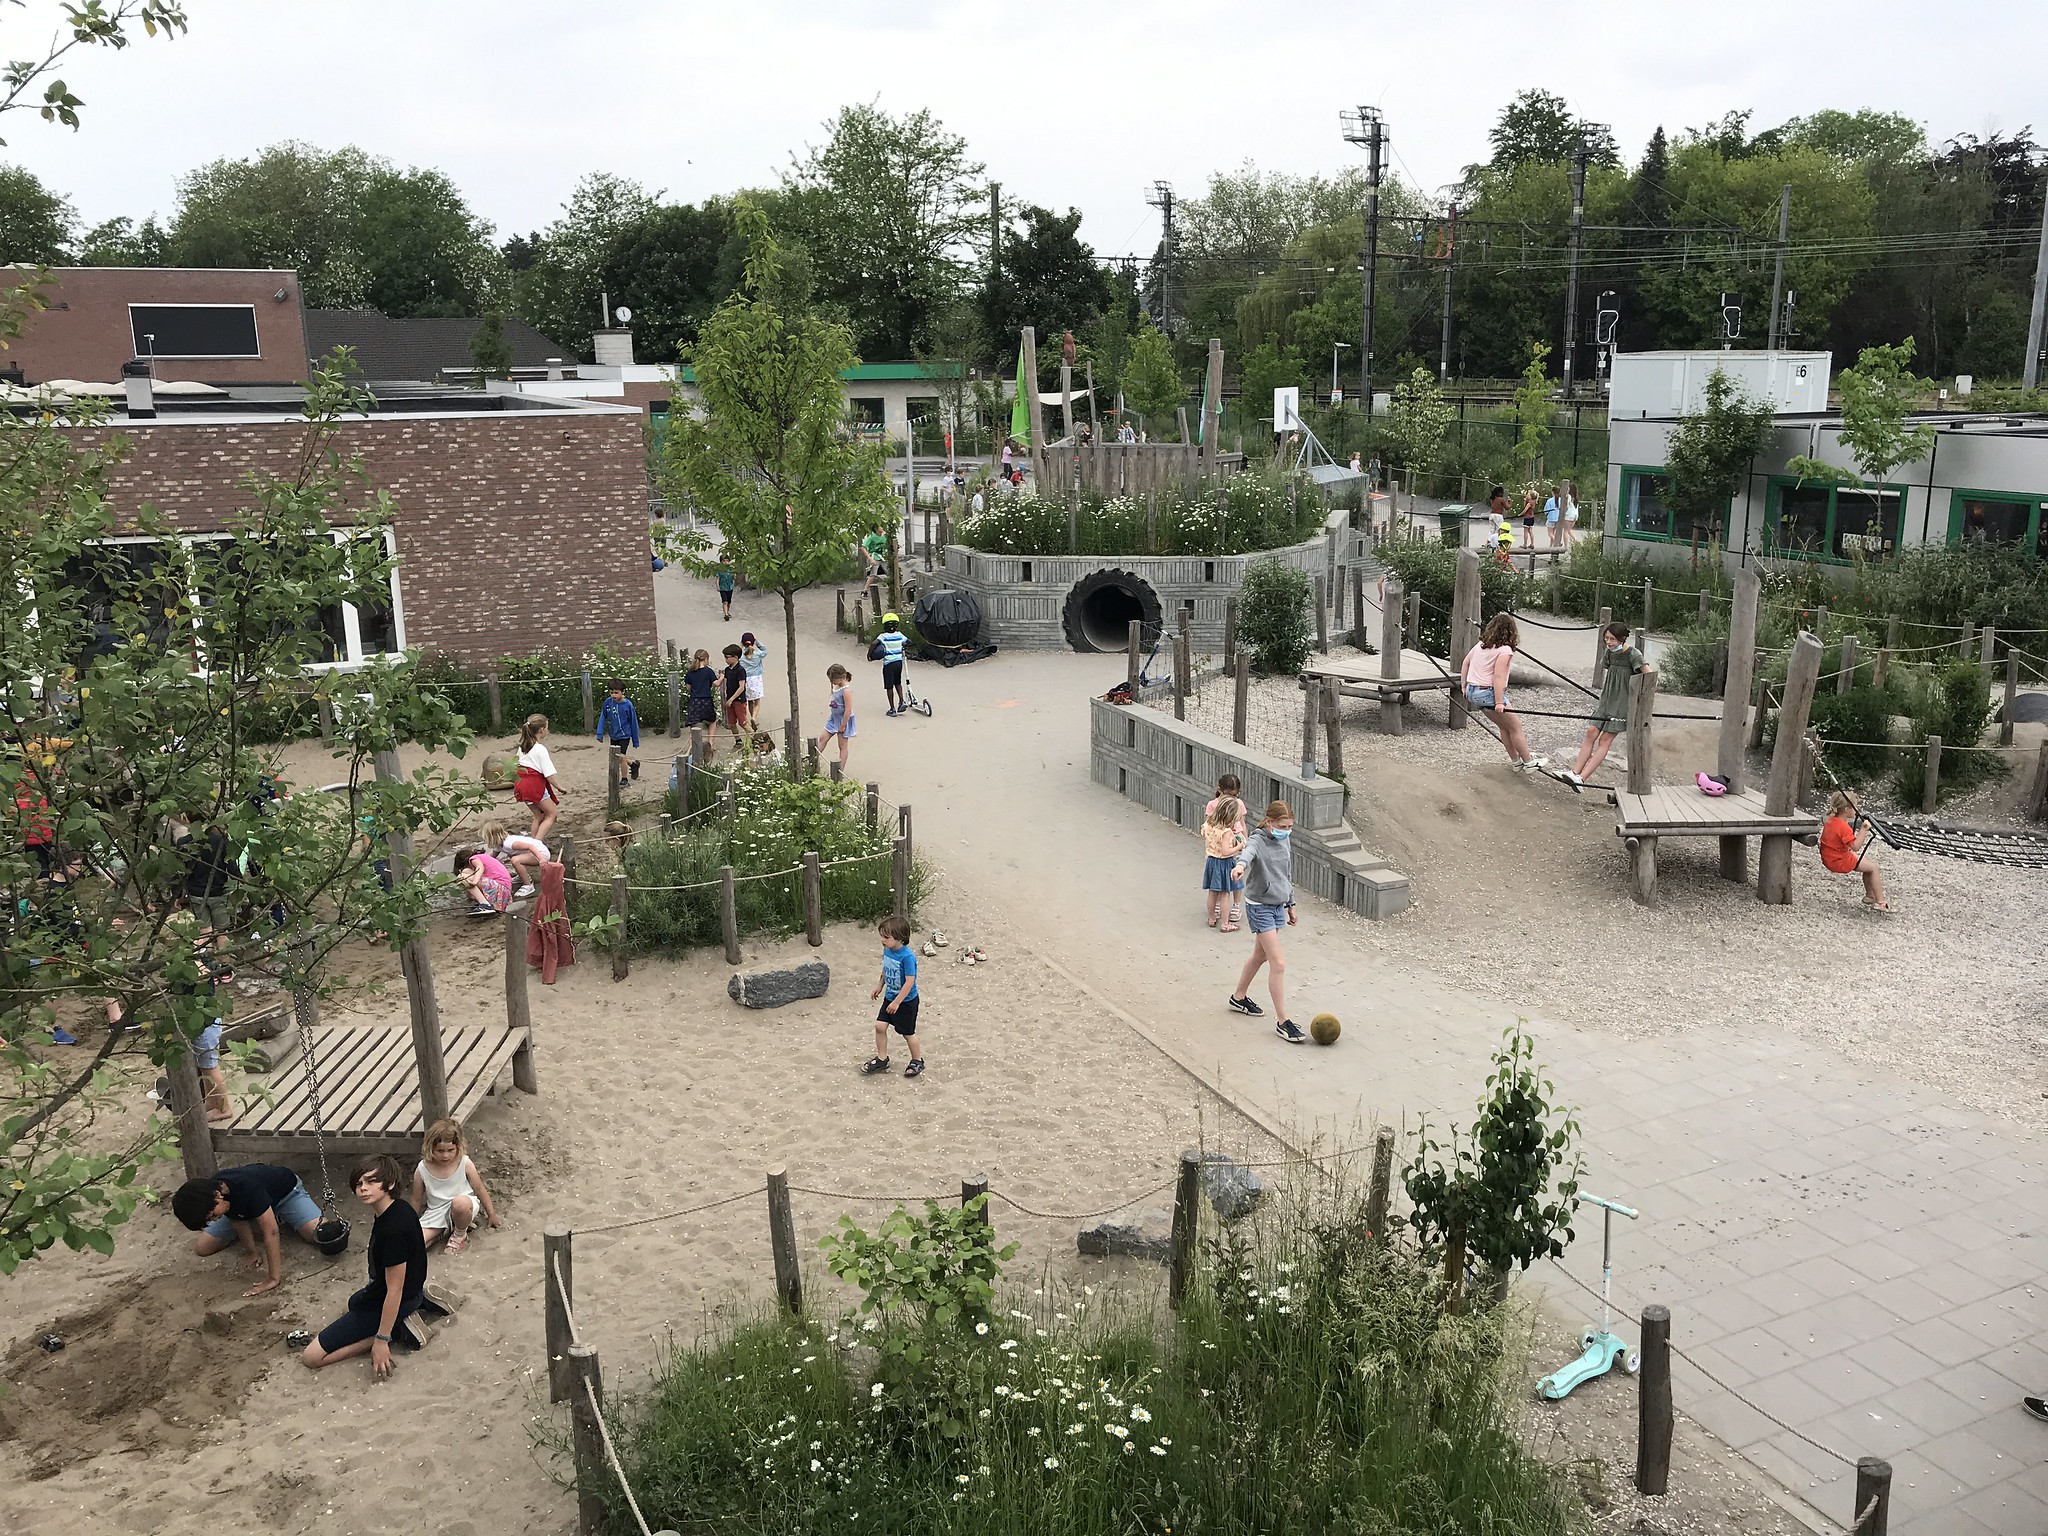 Green playground and outdoor learning - Belgium